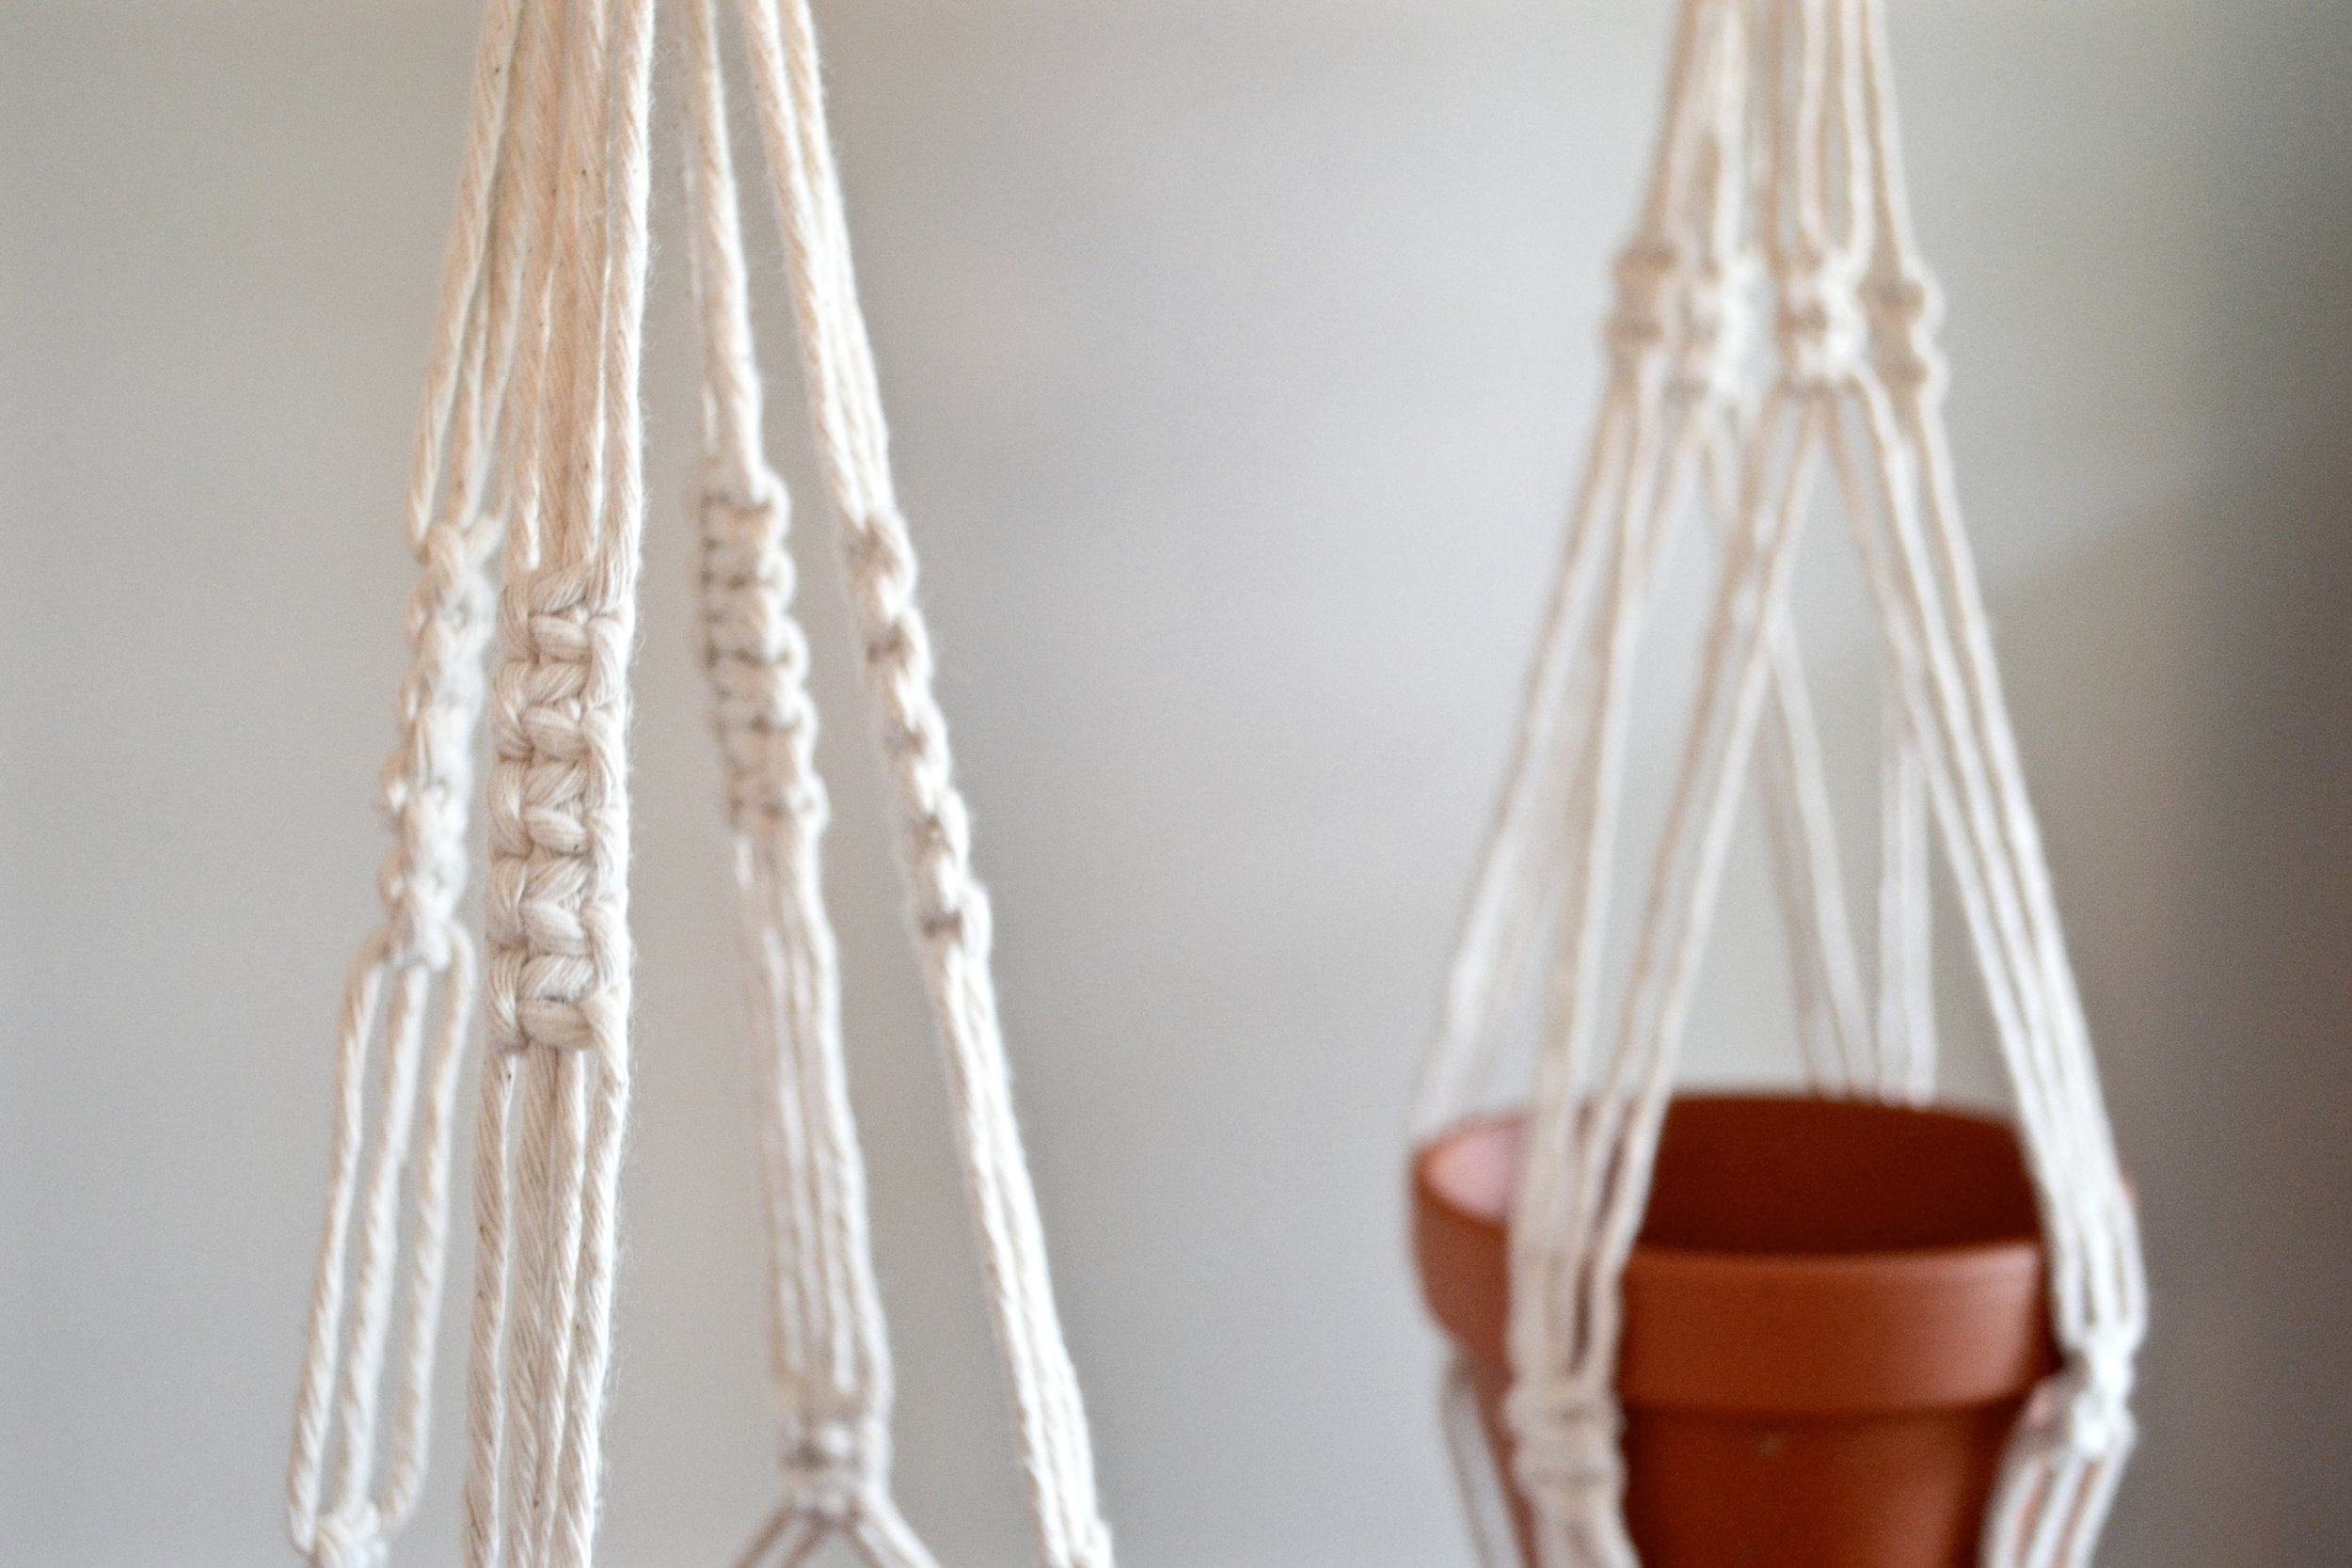  Small minimalist plant hangers - 14 inches long - available for purchase (made to order) 